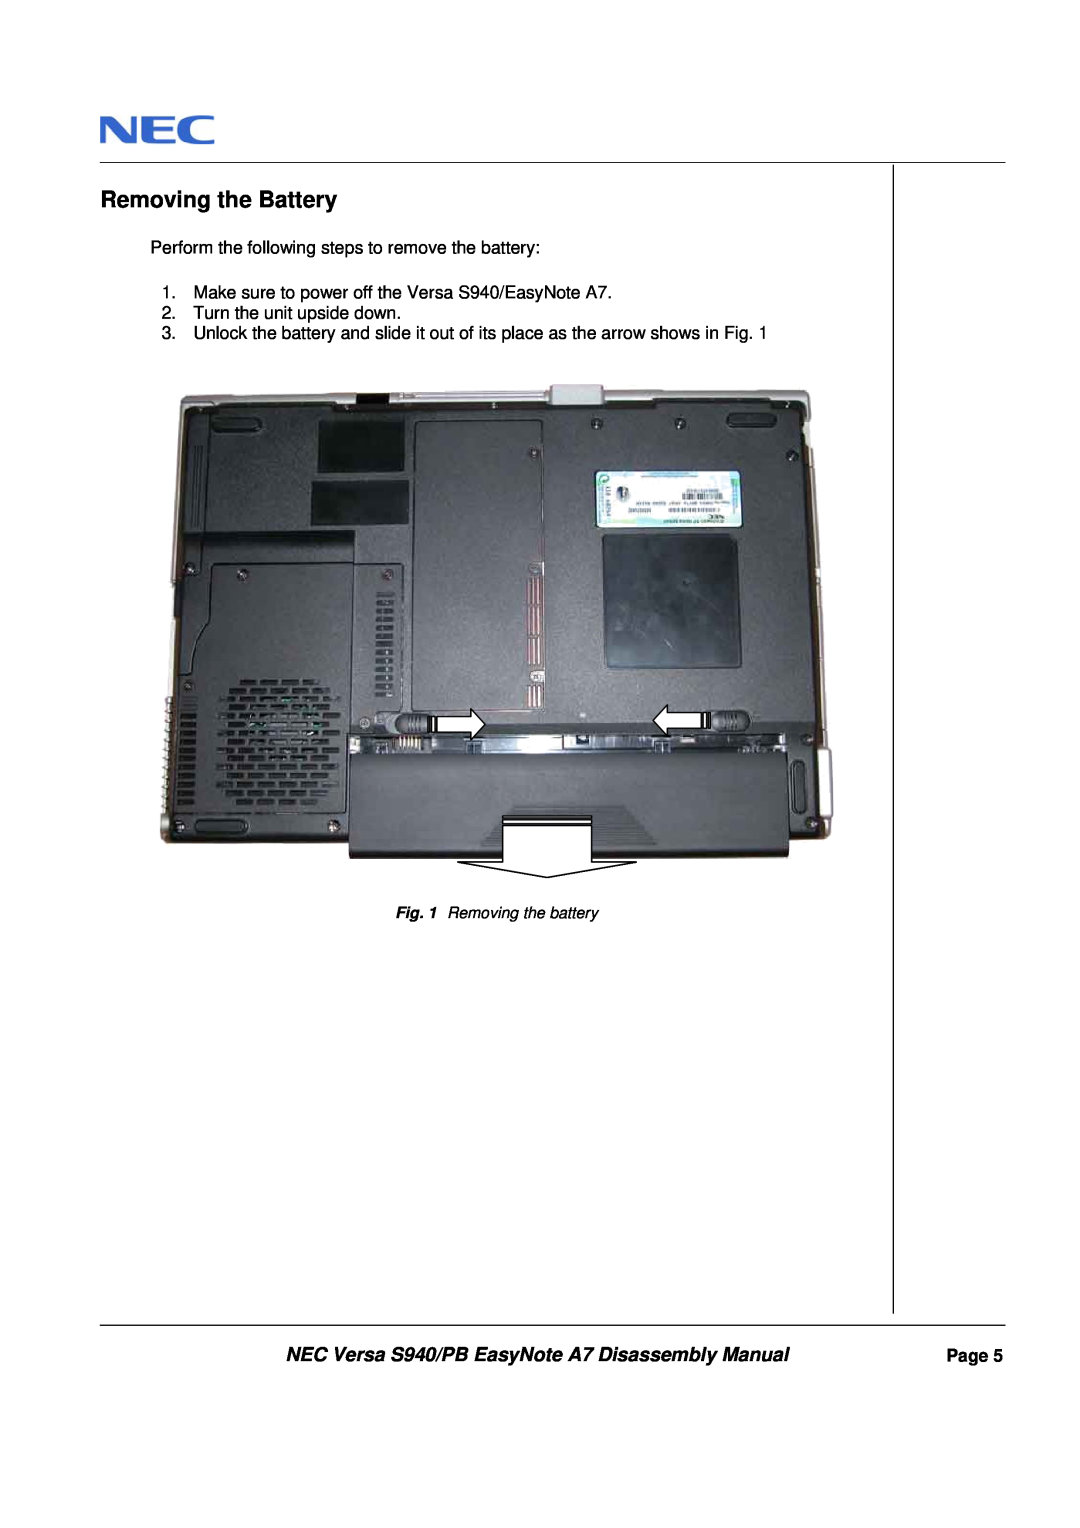 Packard Bell Removing the Battery, NEC Versa S940/PB EasyNote A7 Disassembly Manual, Turn the unit upside down, Page 